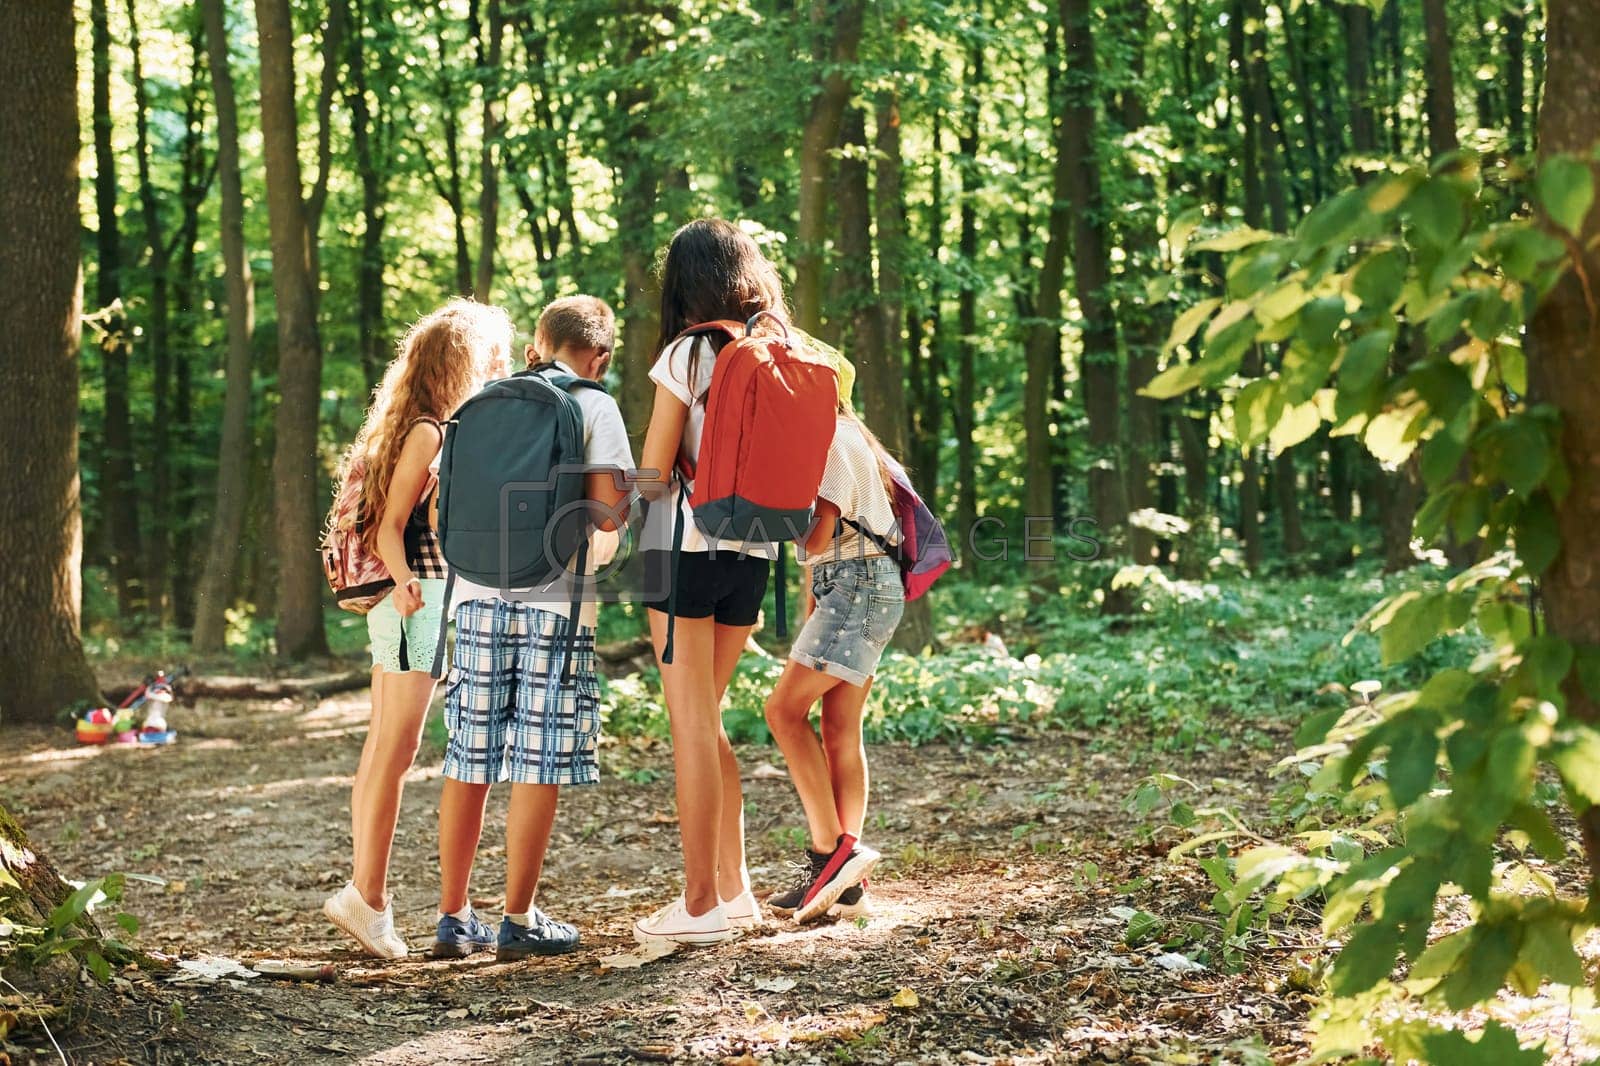 Royalty free image of Kids strolling in the forest with travel equipment by Standret